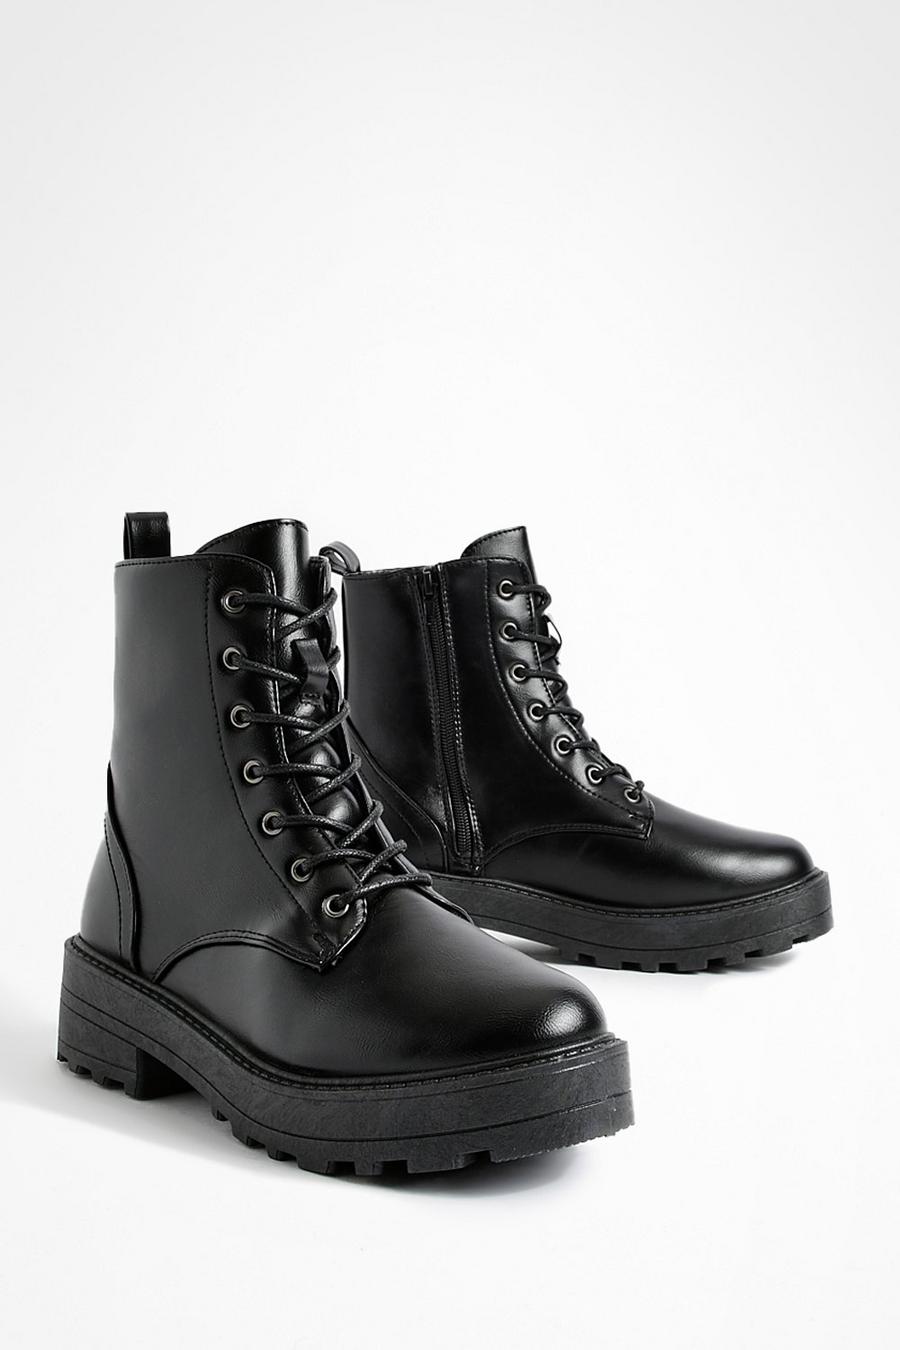 Wide Width Lace Up Chunky Combat Boots